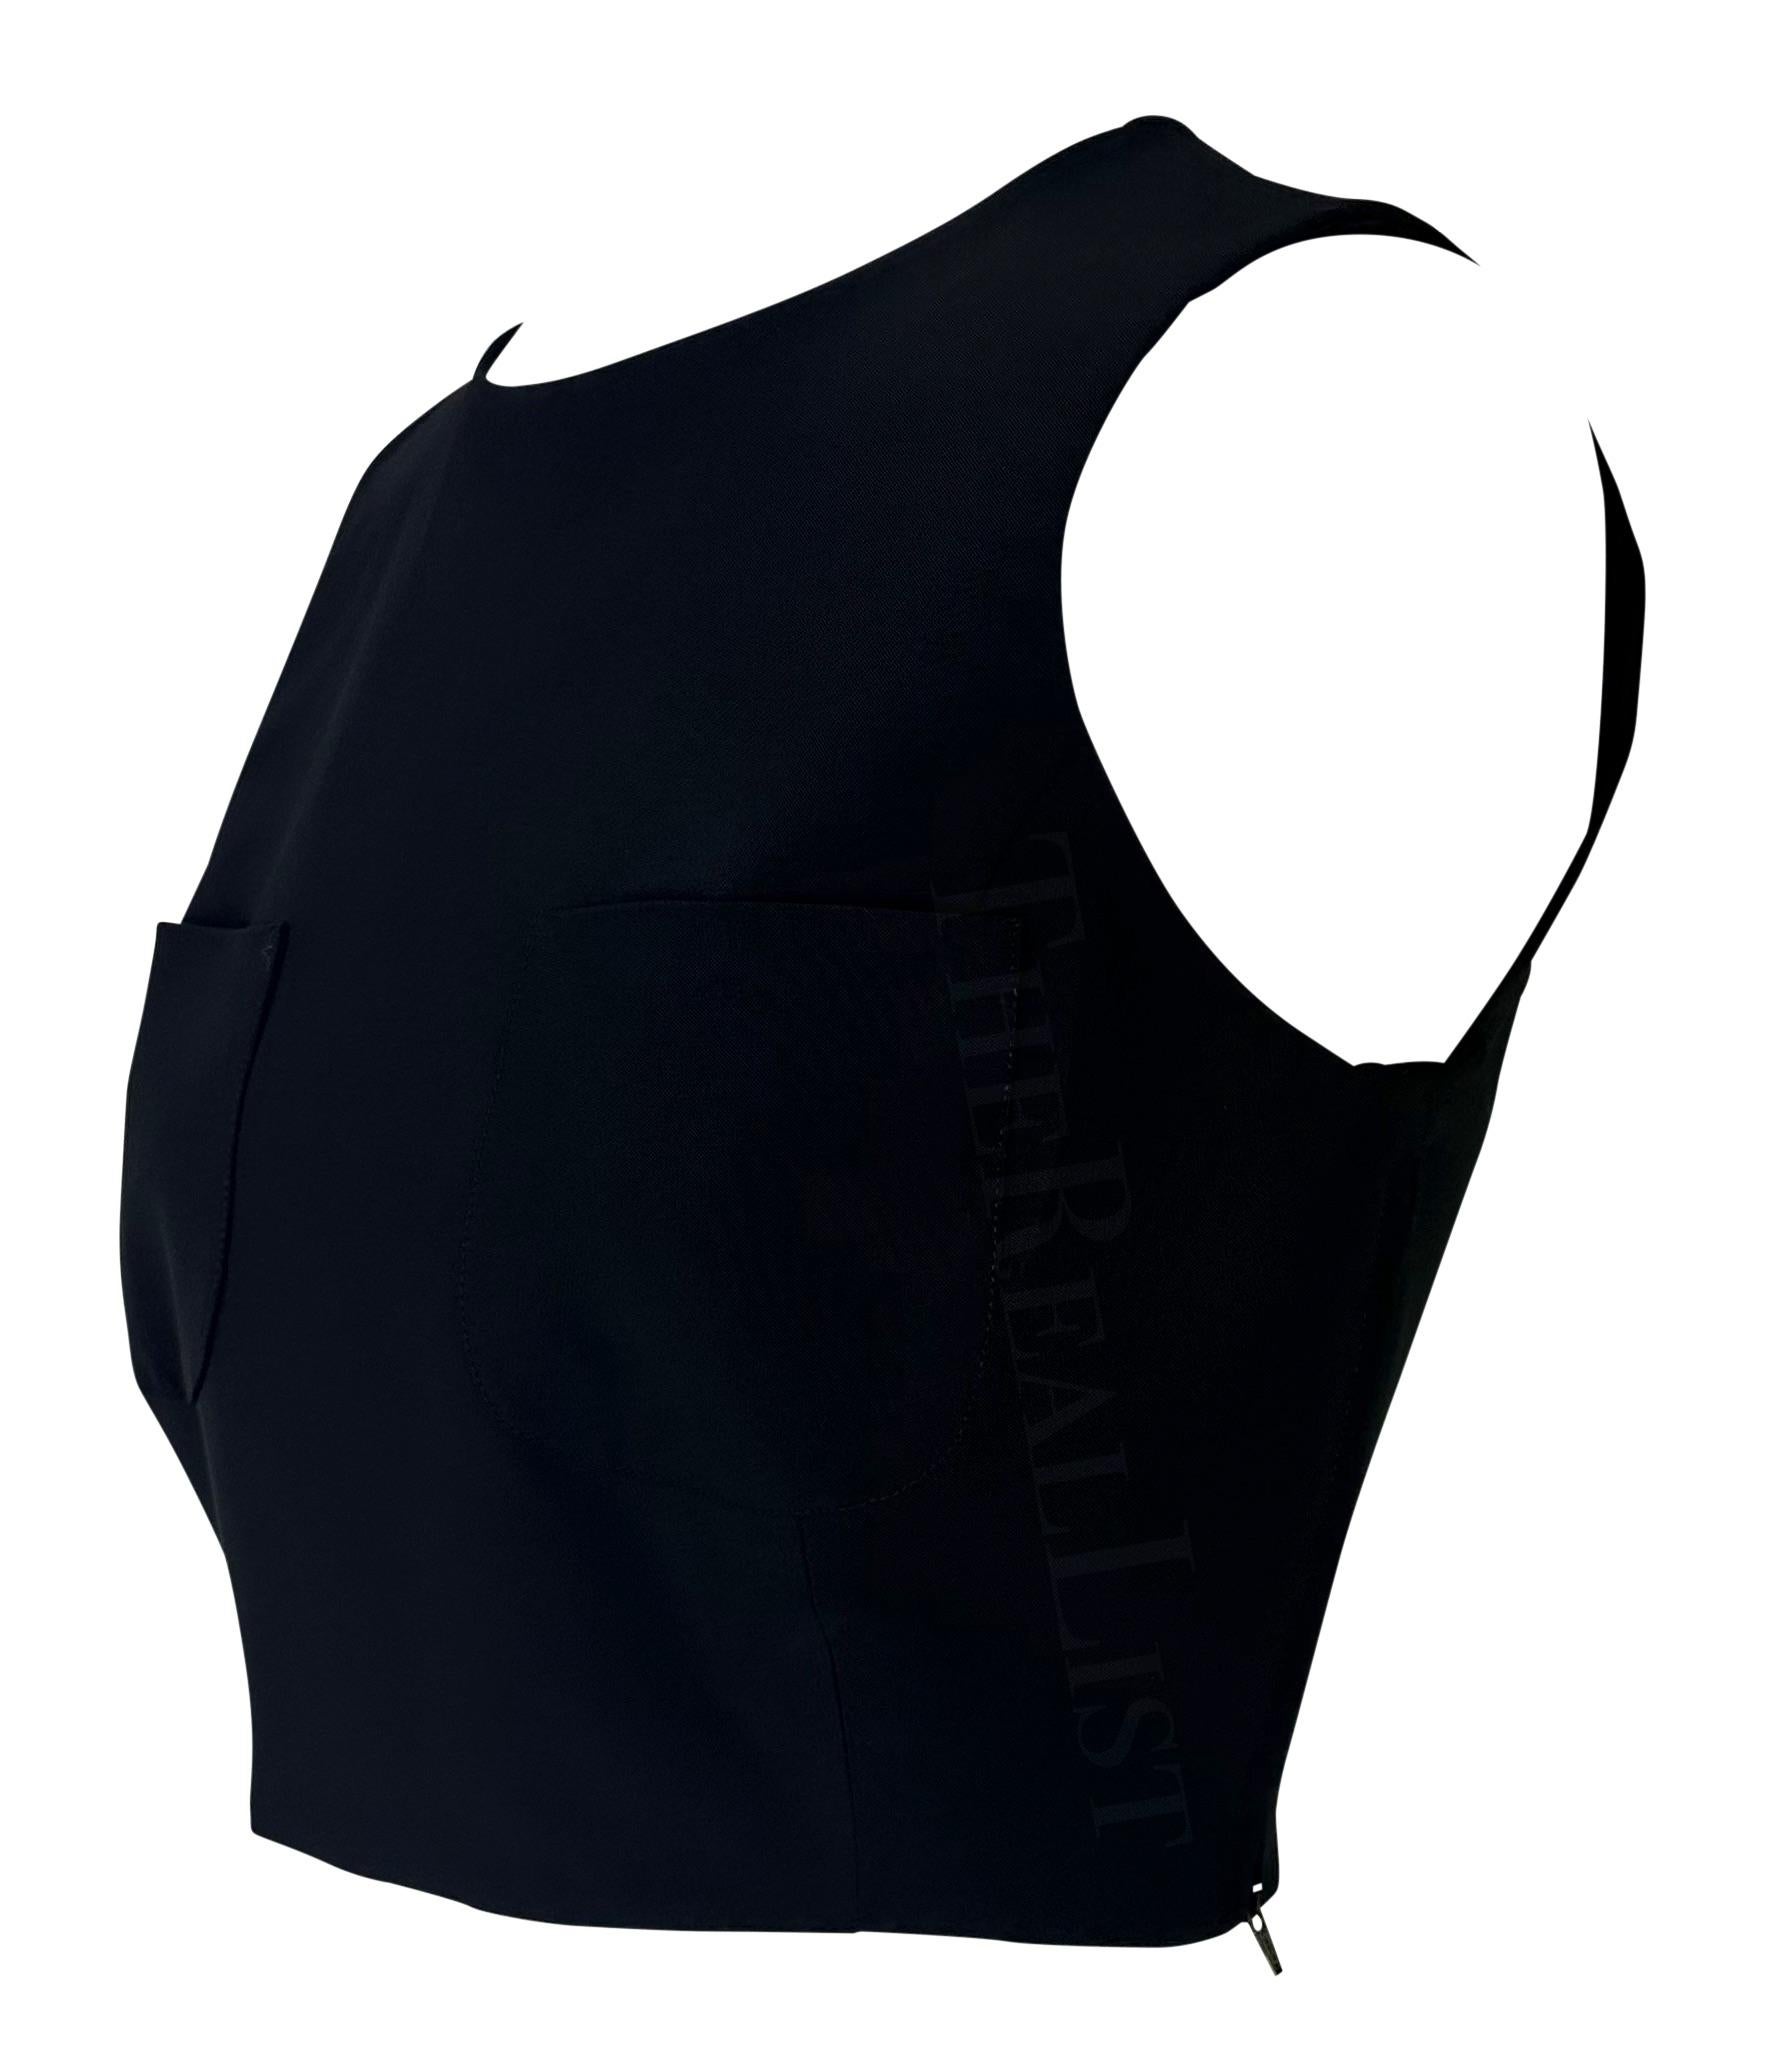 Presenting a fabulous black Gucci crop top, designed by Tom Ford. From the Spring/Summer 1996 collection, this chic sleeveless crop top features a crew neckline and two pockets at the bust. Add this hot Gucci by Tom Ford crop top to your wardrobe!